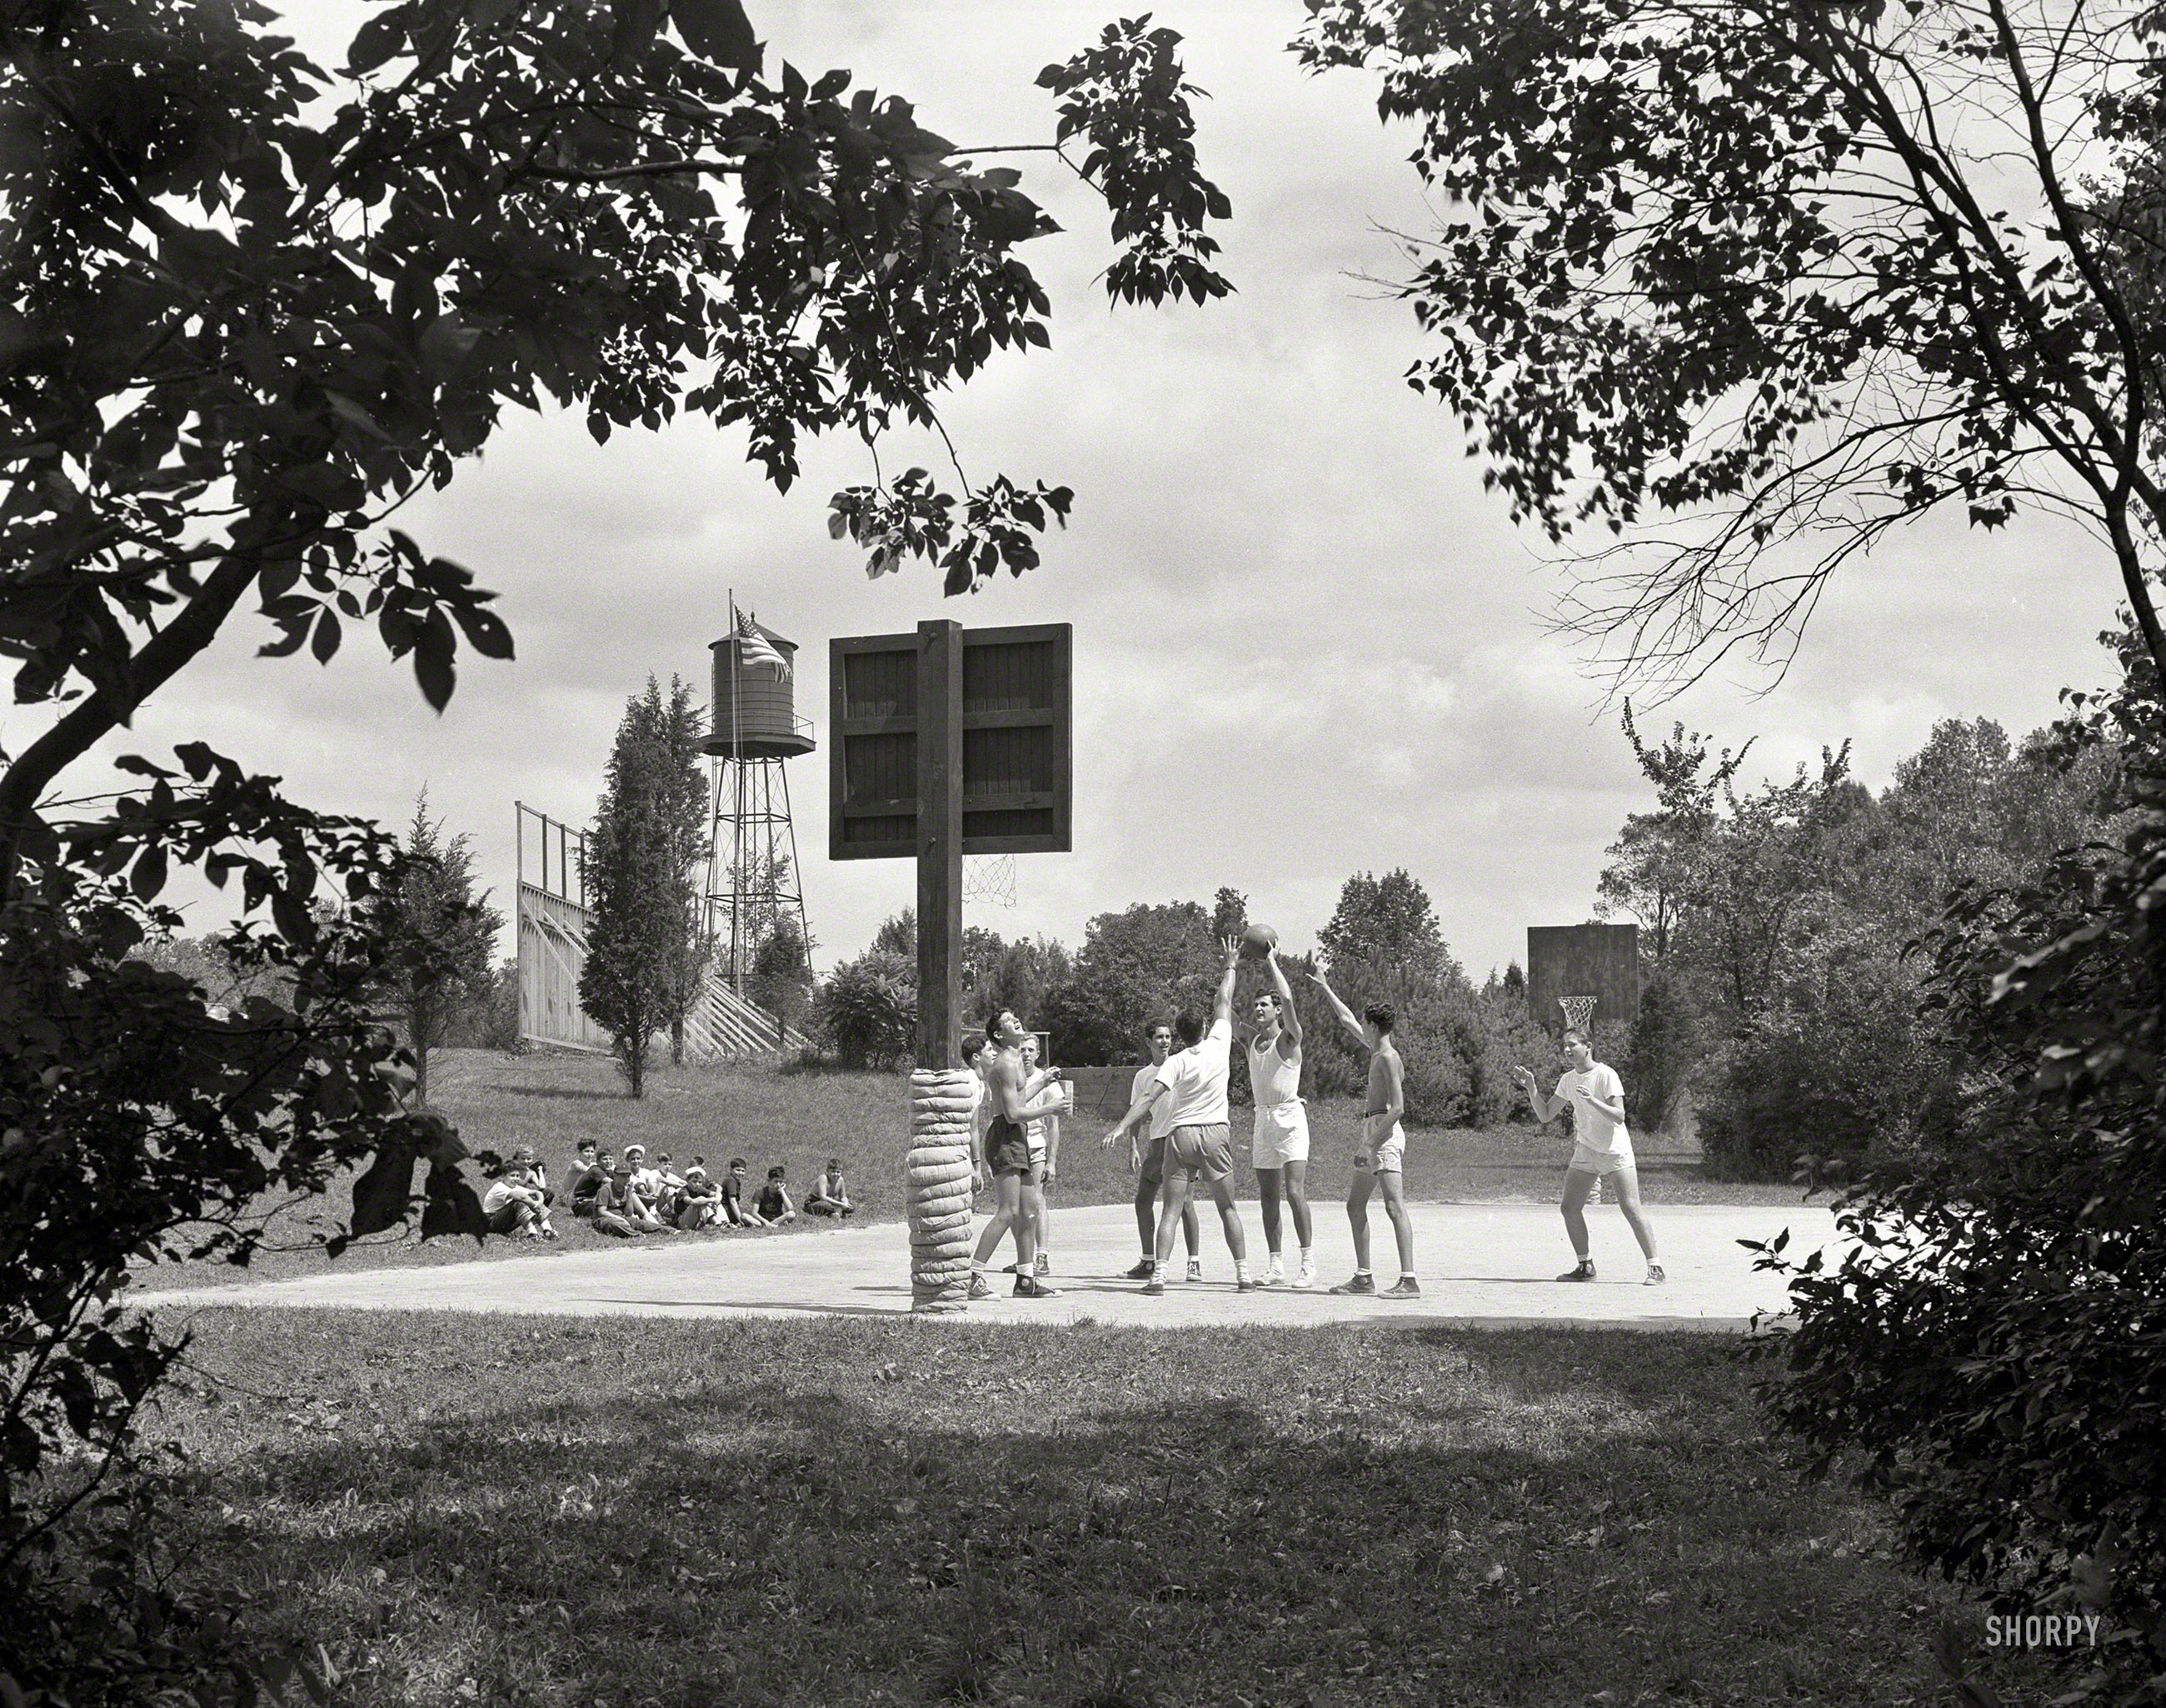 August 23, 1951. "Indian Head Camp, Bushkill, Pennsylvania. Boys on basketball court." Large-format acetate negative by Gottscho-Schleisner. View full size.